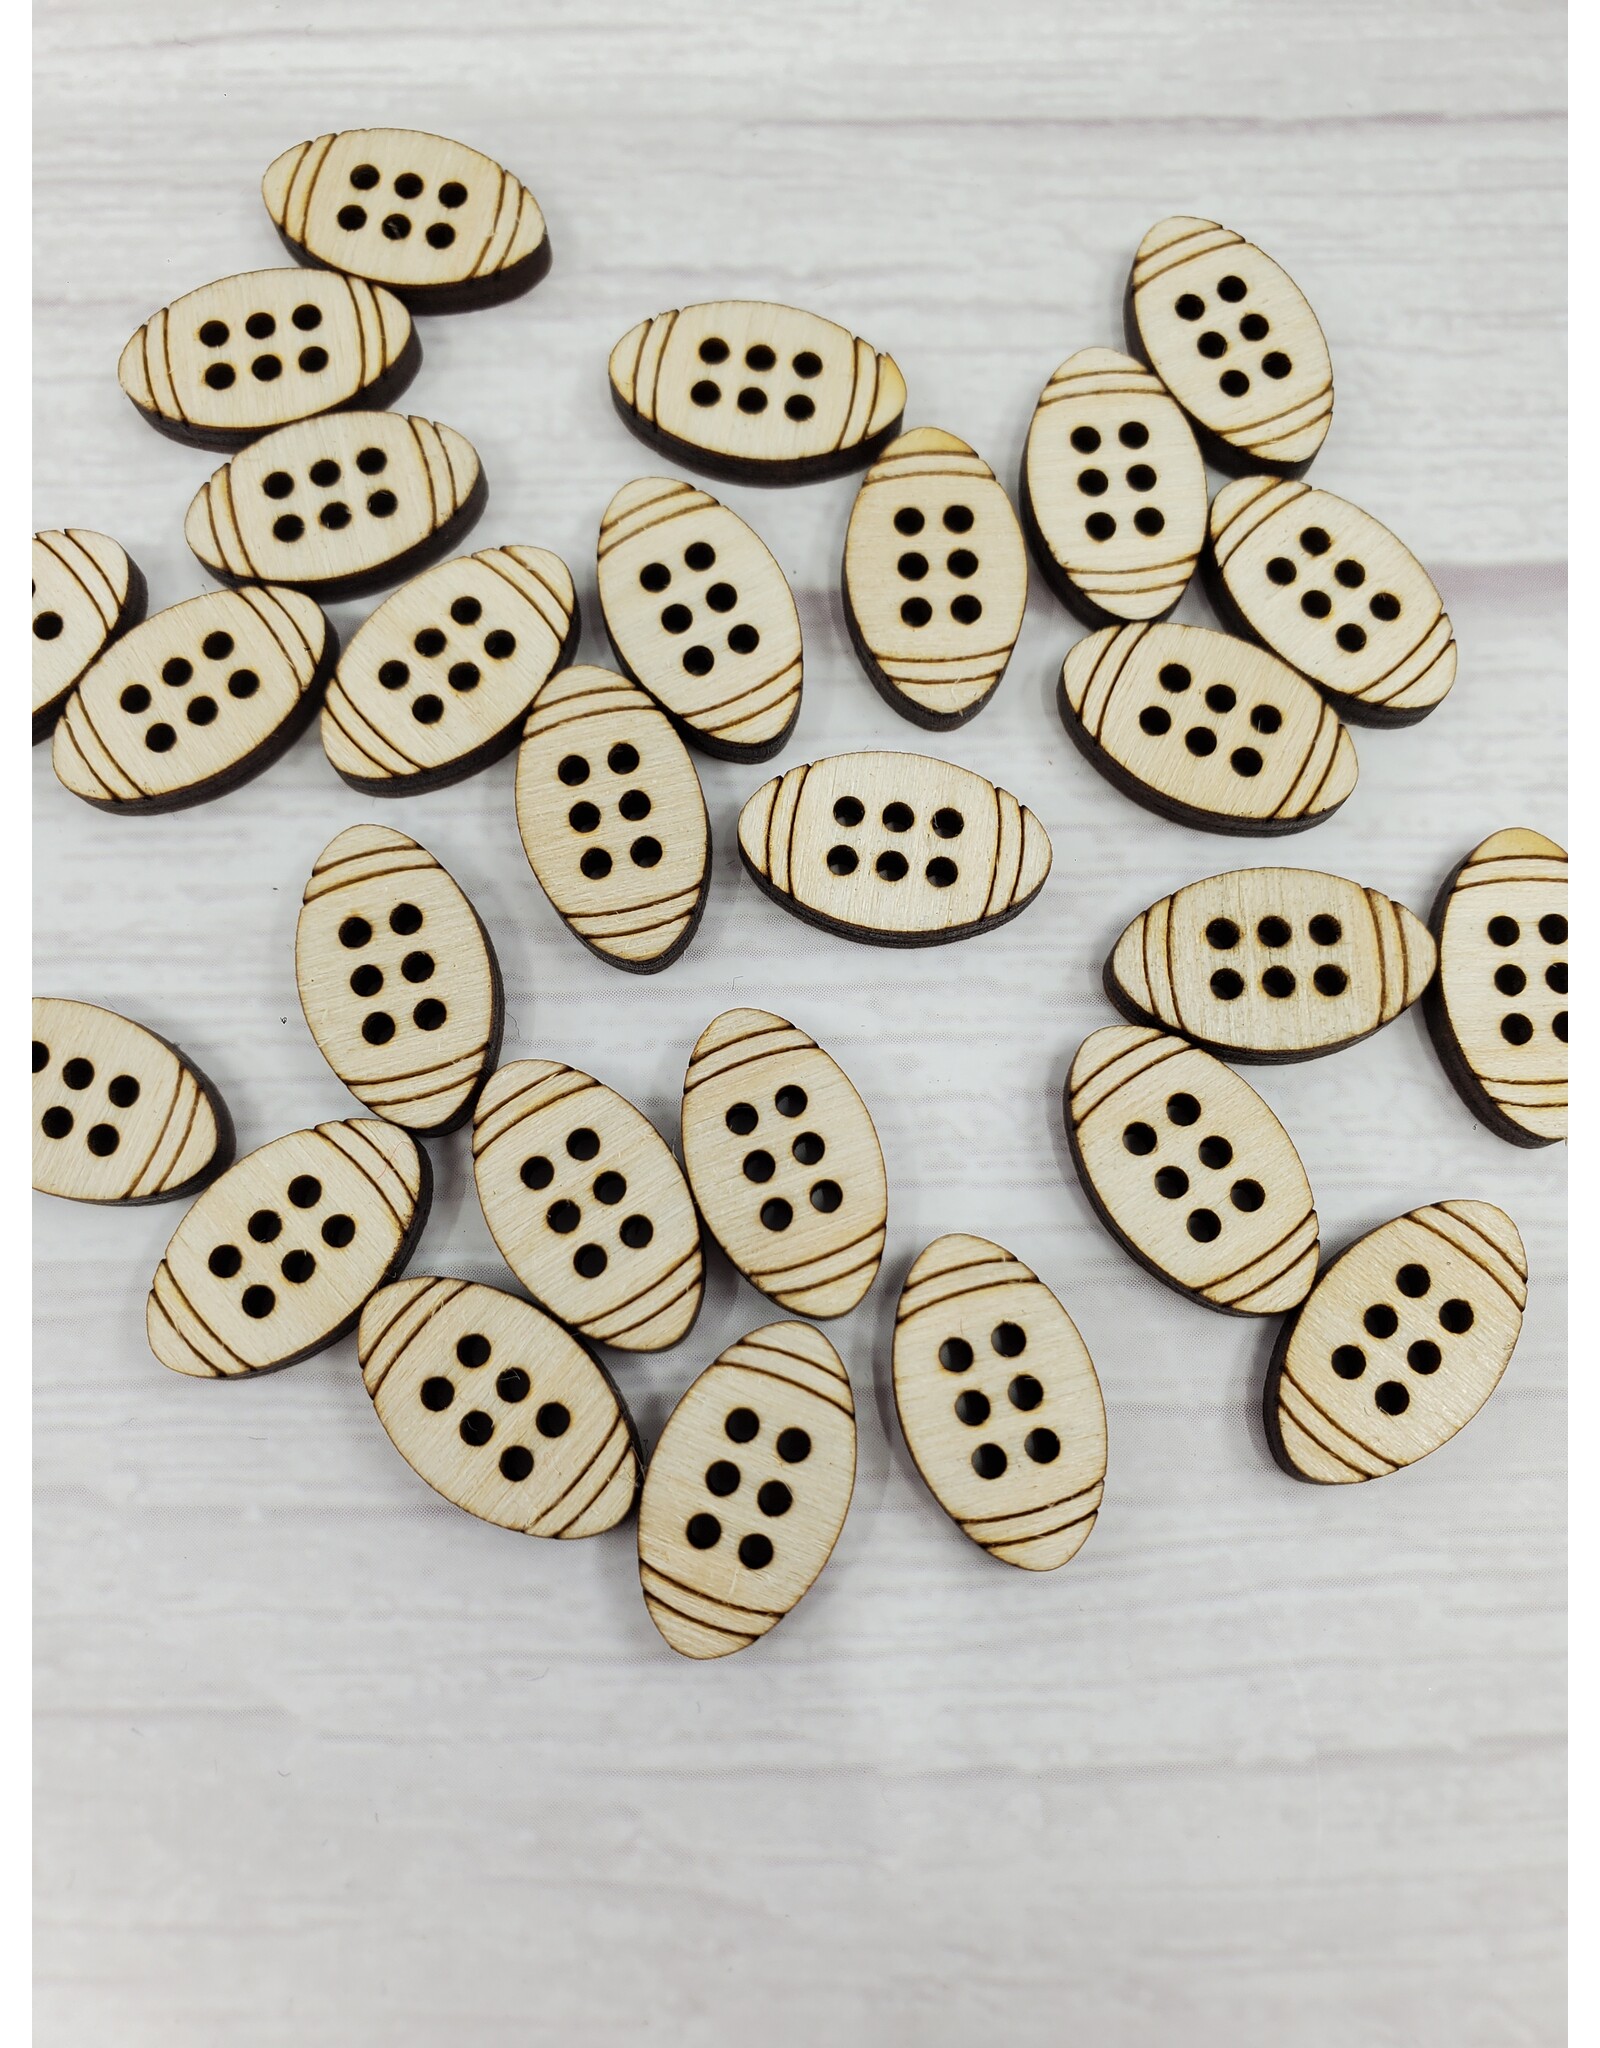 Stranded by the Sea Wooden Football Buttons 0.75 inch